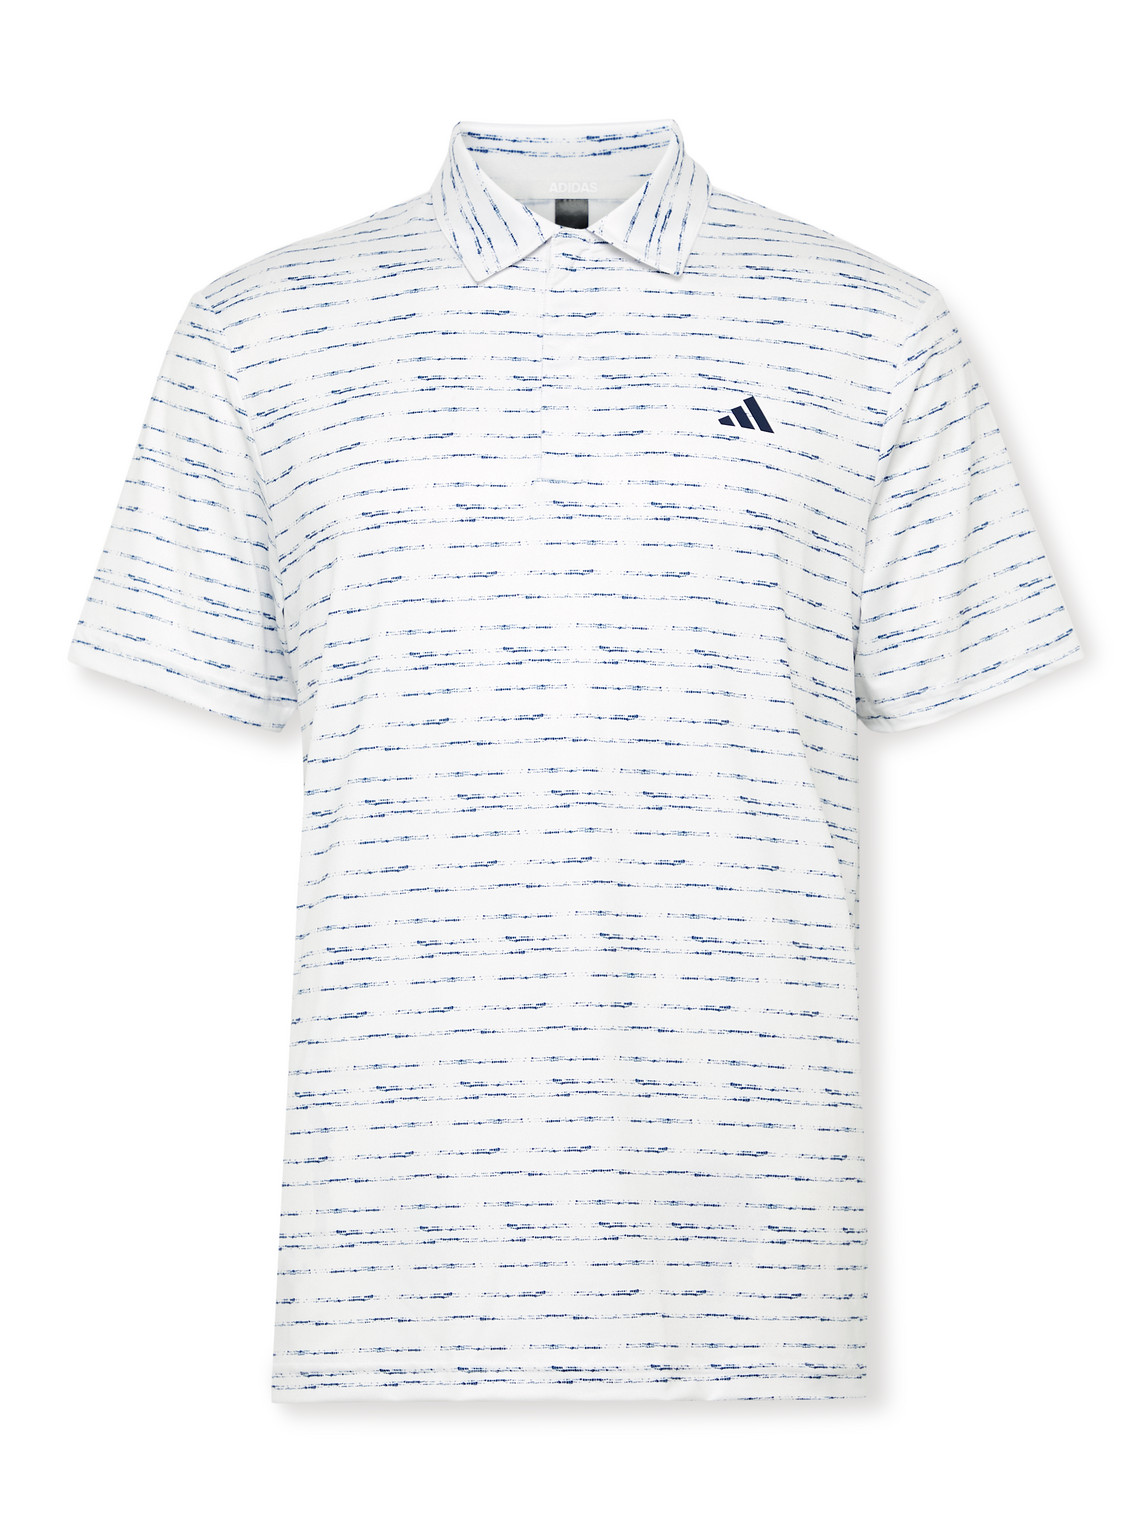 ADIDAS GOLF PRINTED STRETCH RECYCLED-JERSEY POLO SHIRT